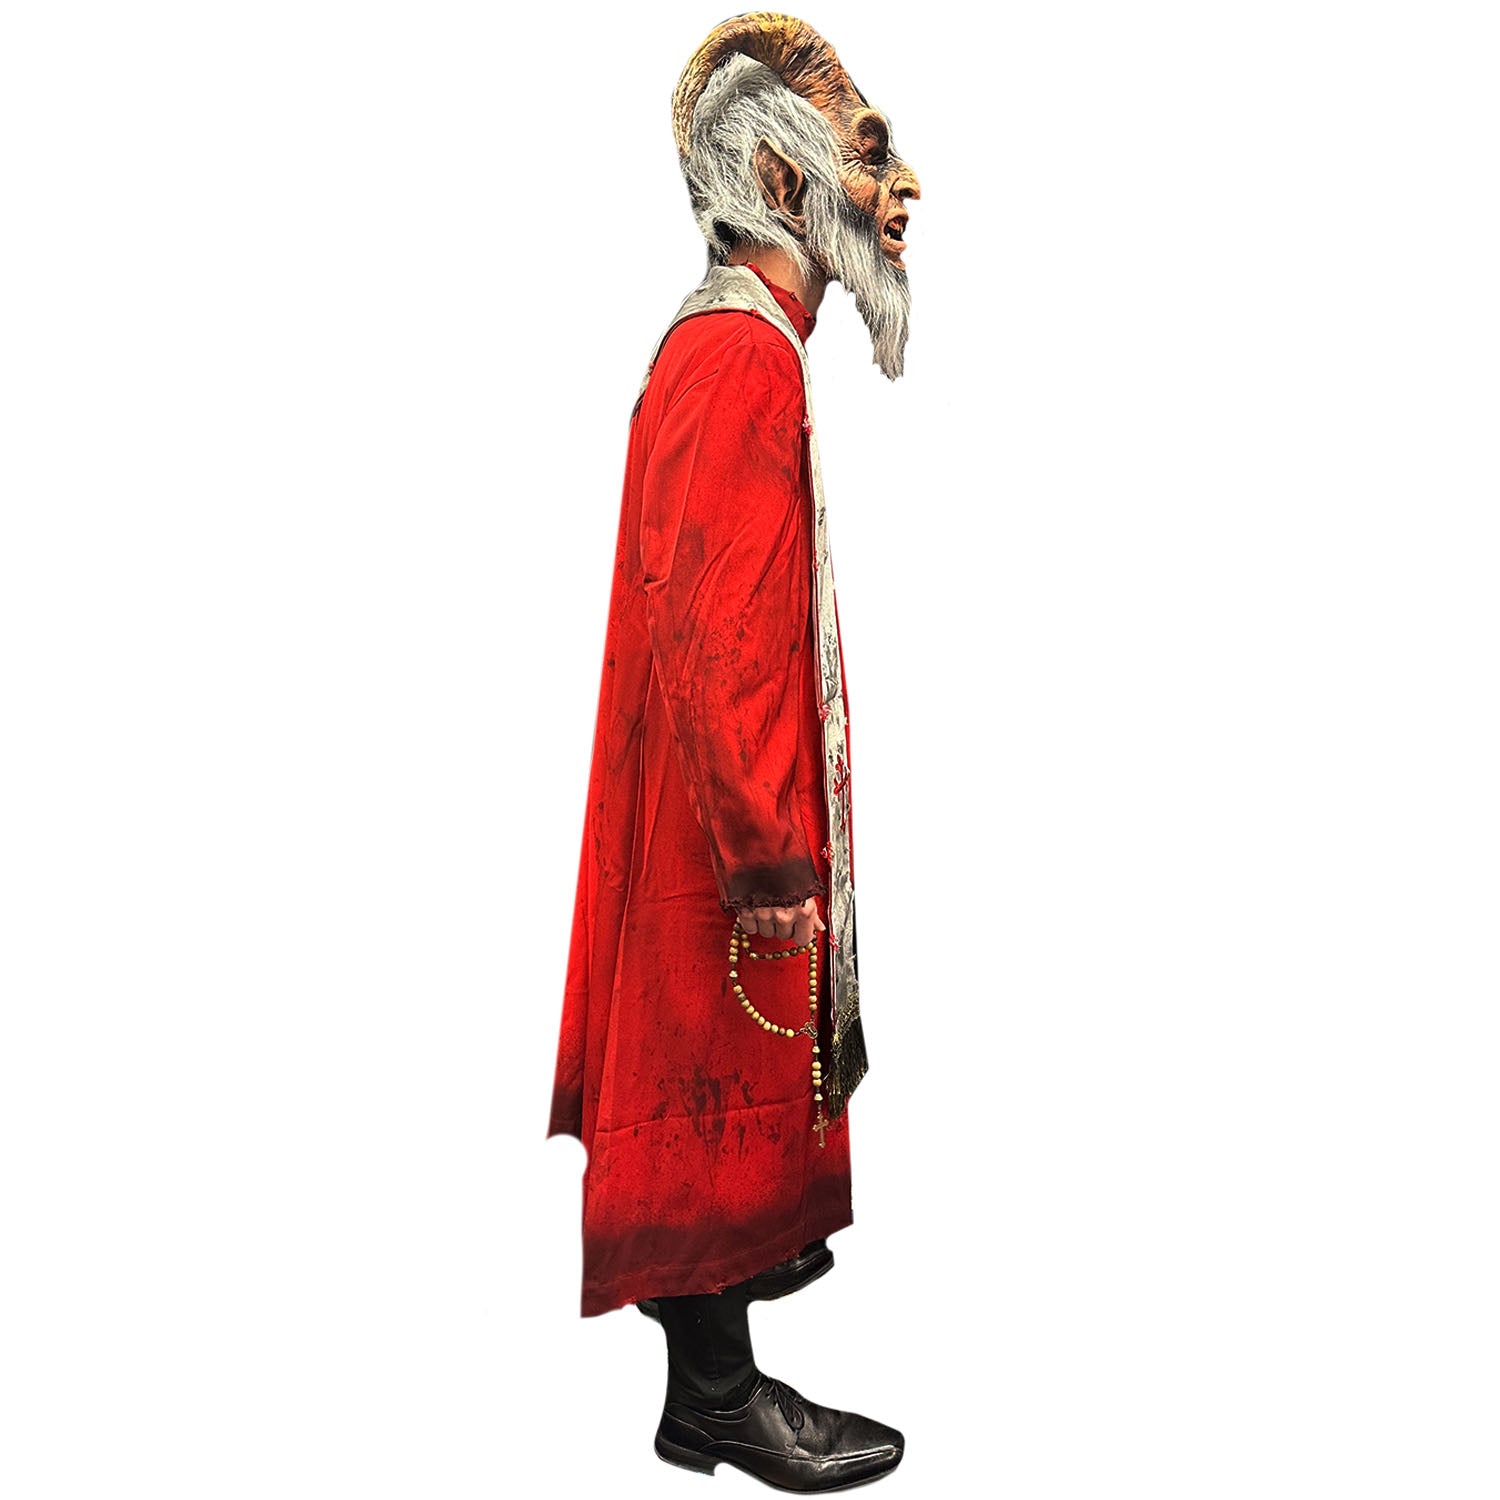 Unholy Robe One Size Adult Costume